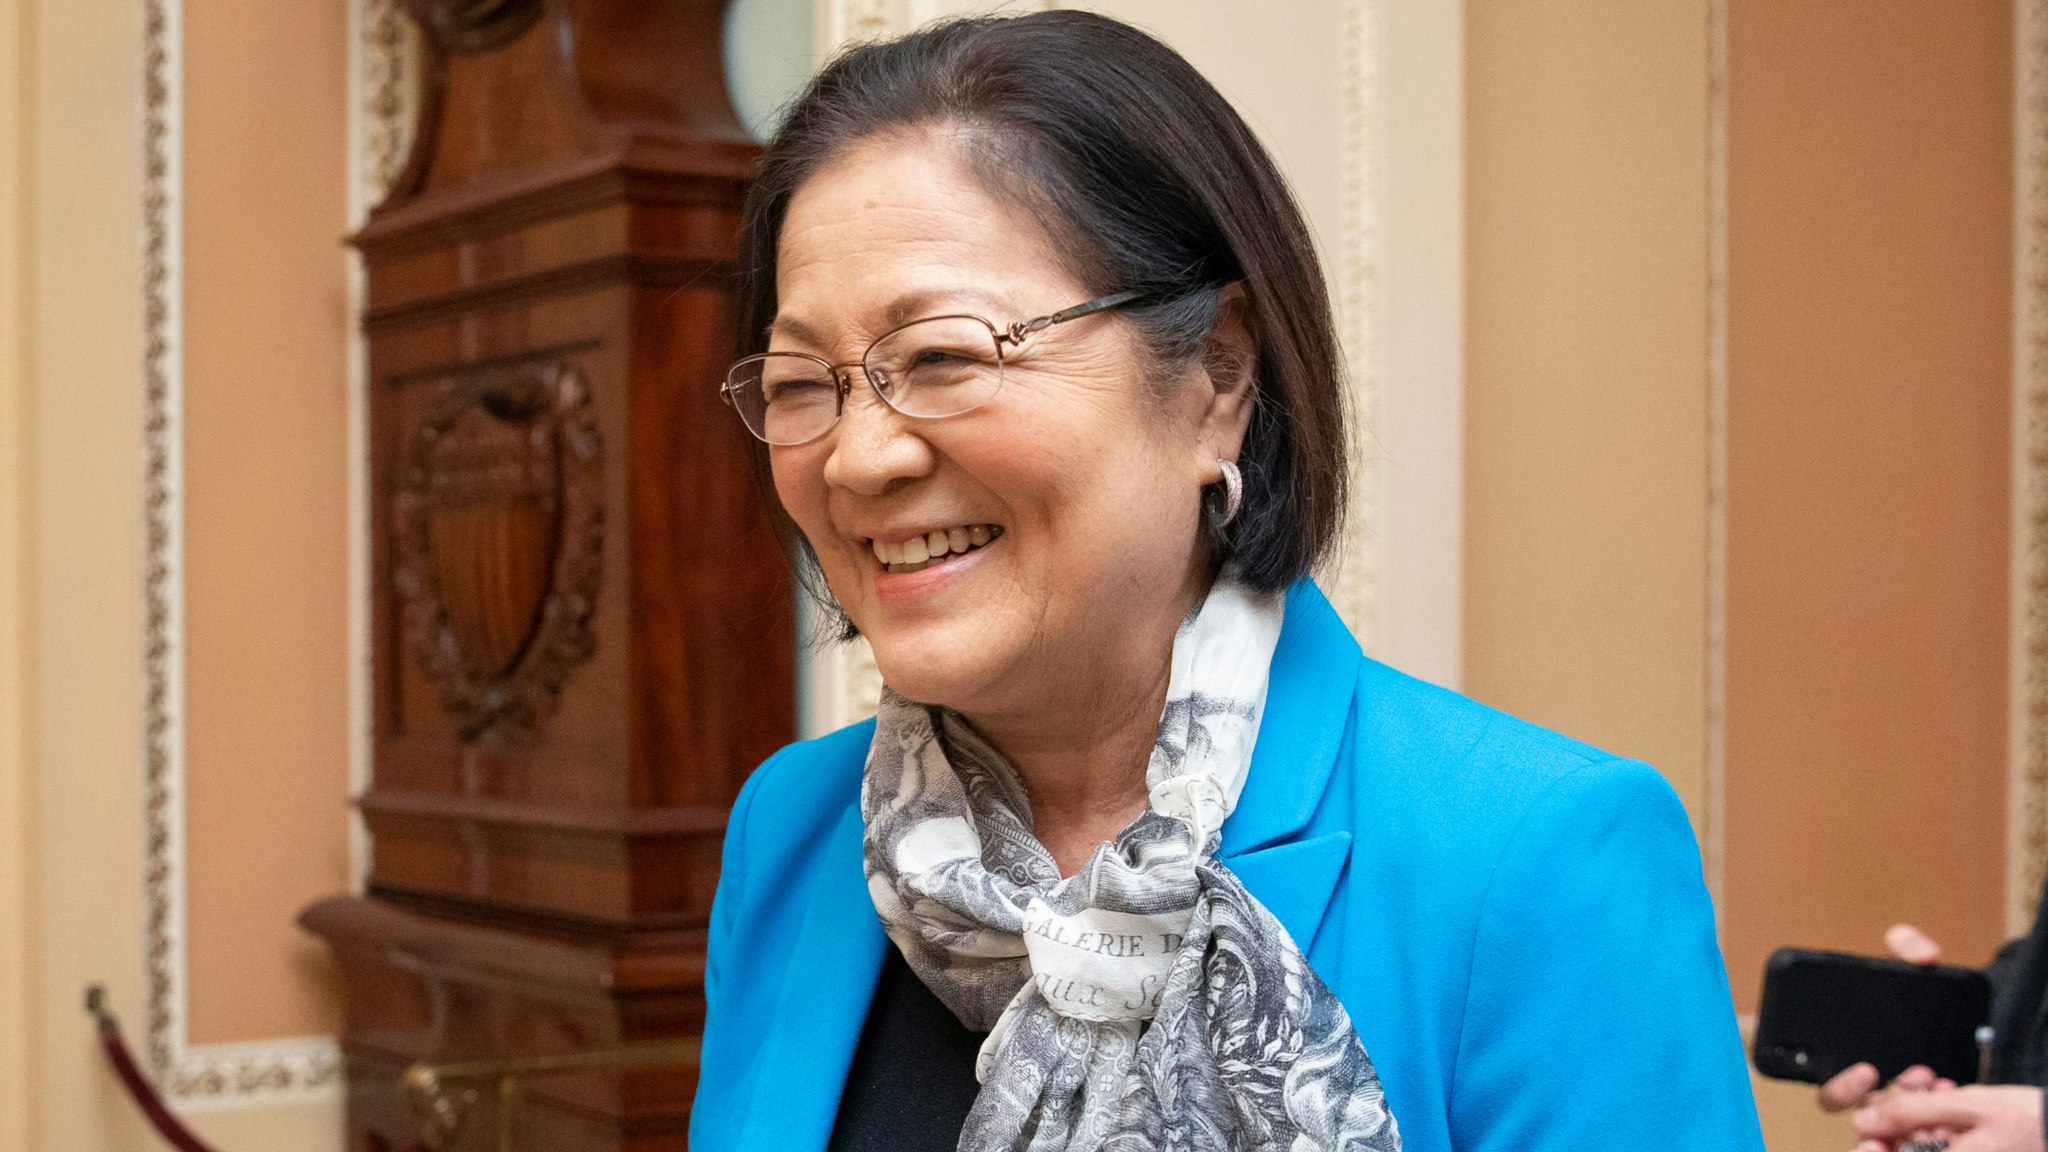 Senator Mazie Hirono, a Democrat from Hawaii, walks with a Senate staff member during a Senate recess at the U.S. Capitol in Washington, D.C., U.S., on Wednesday, Jan. 22, 2020. The Senate set the terms for President Donald Trump's impeachment trial, but not before Majority Leader Mitch McConnell and the president got a reminder that a small group of GOP senators can determine how it will play out.